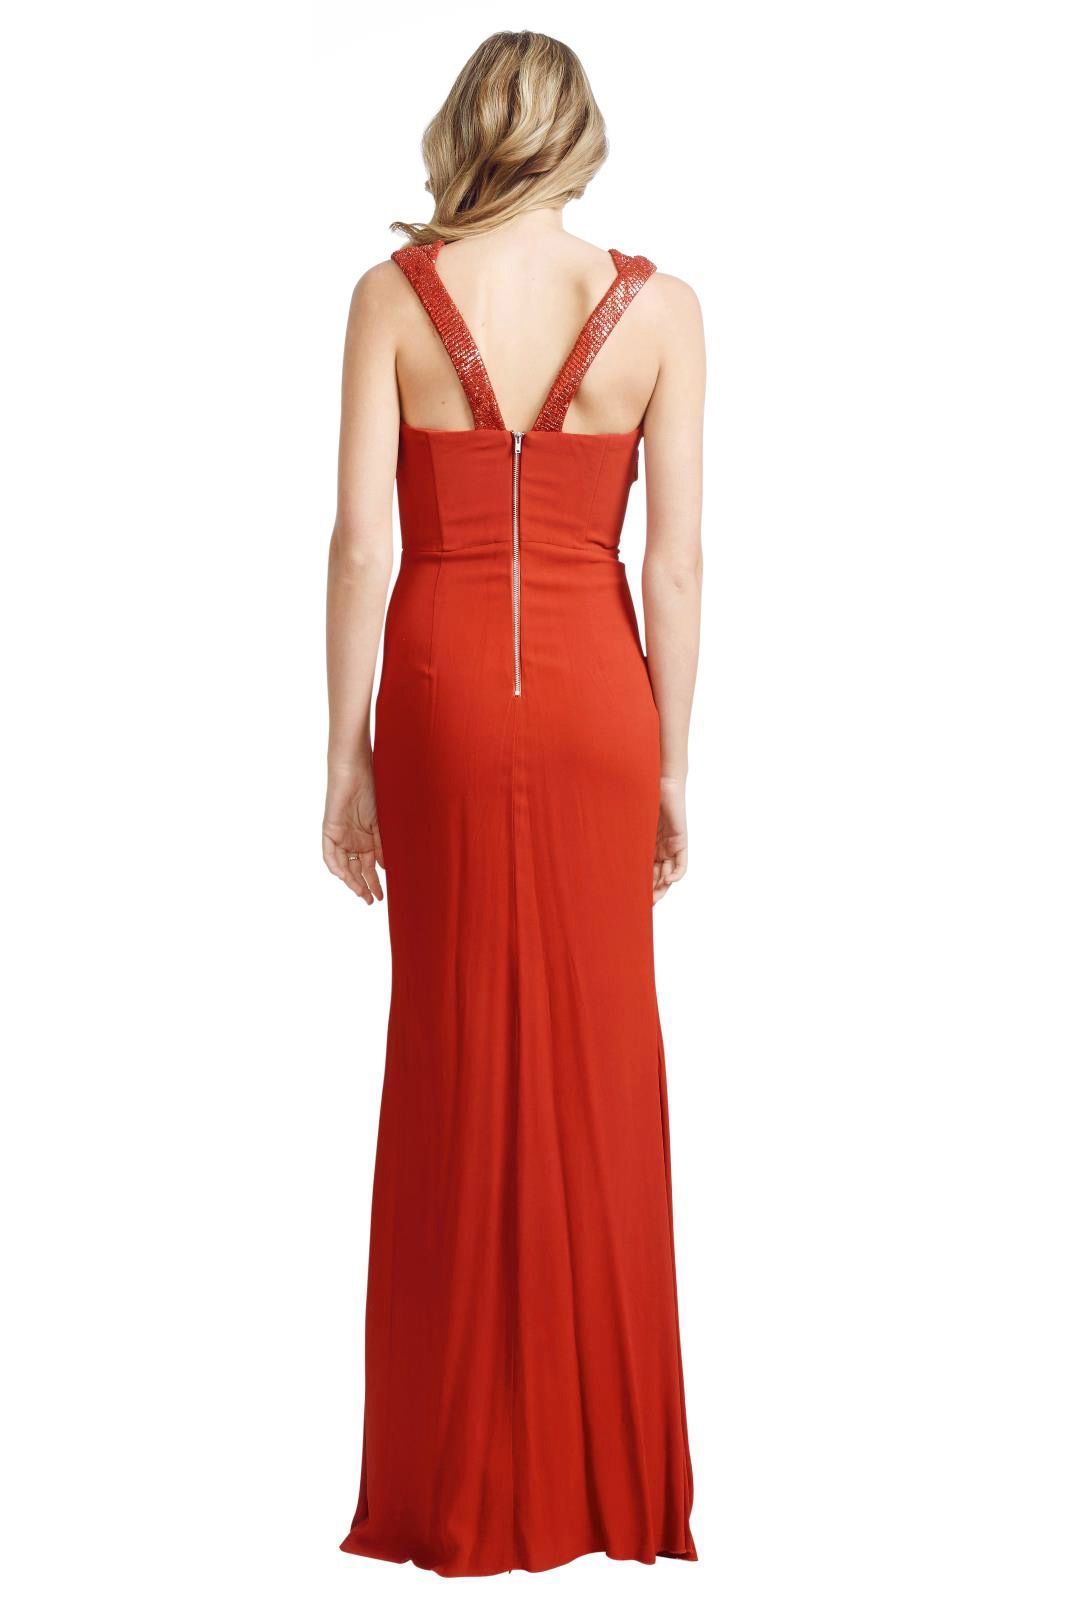 Alex Perry - Nadia Gown - Red - Back